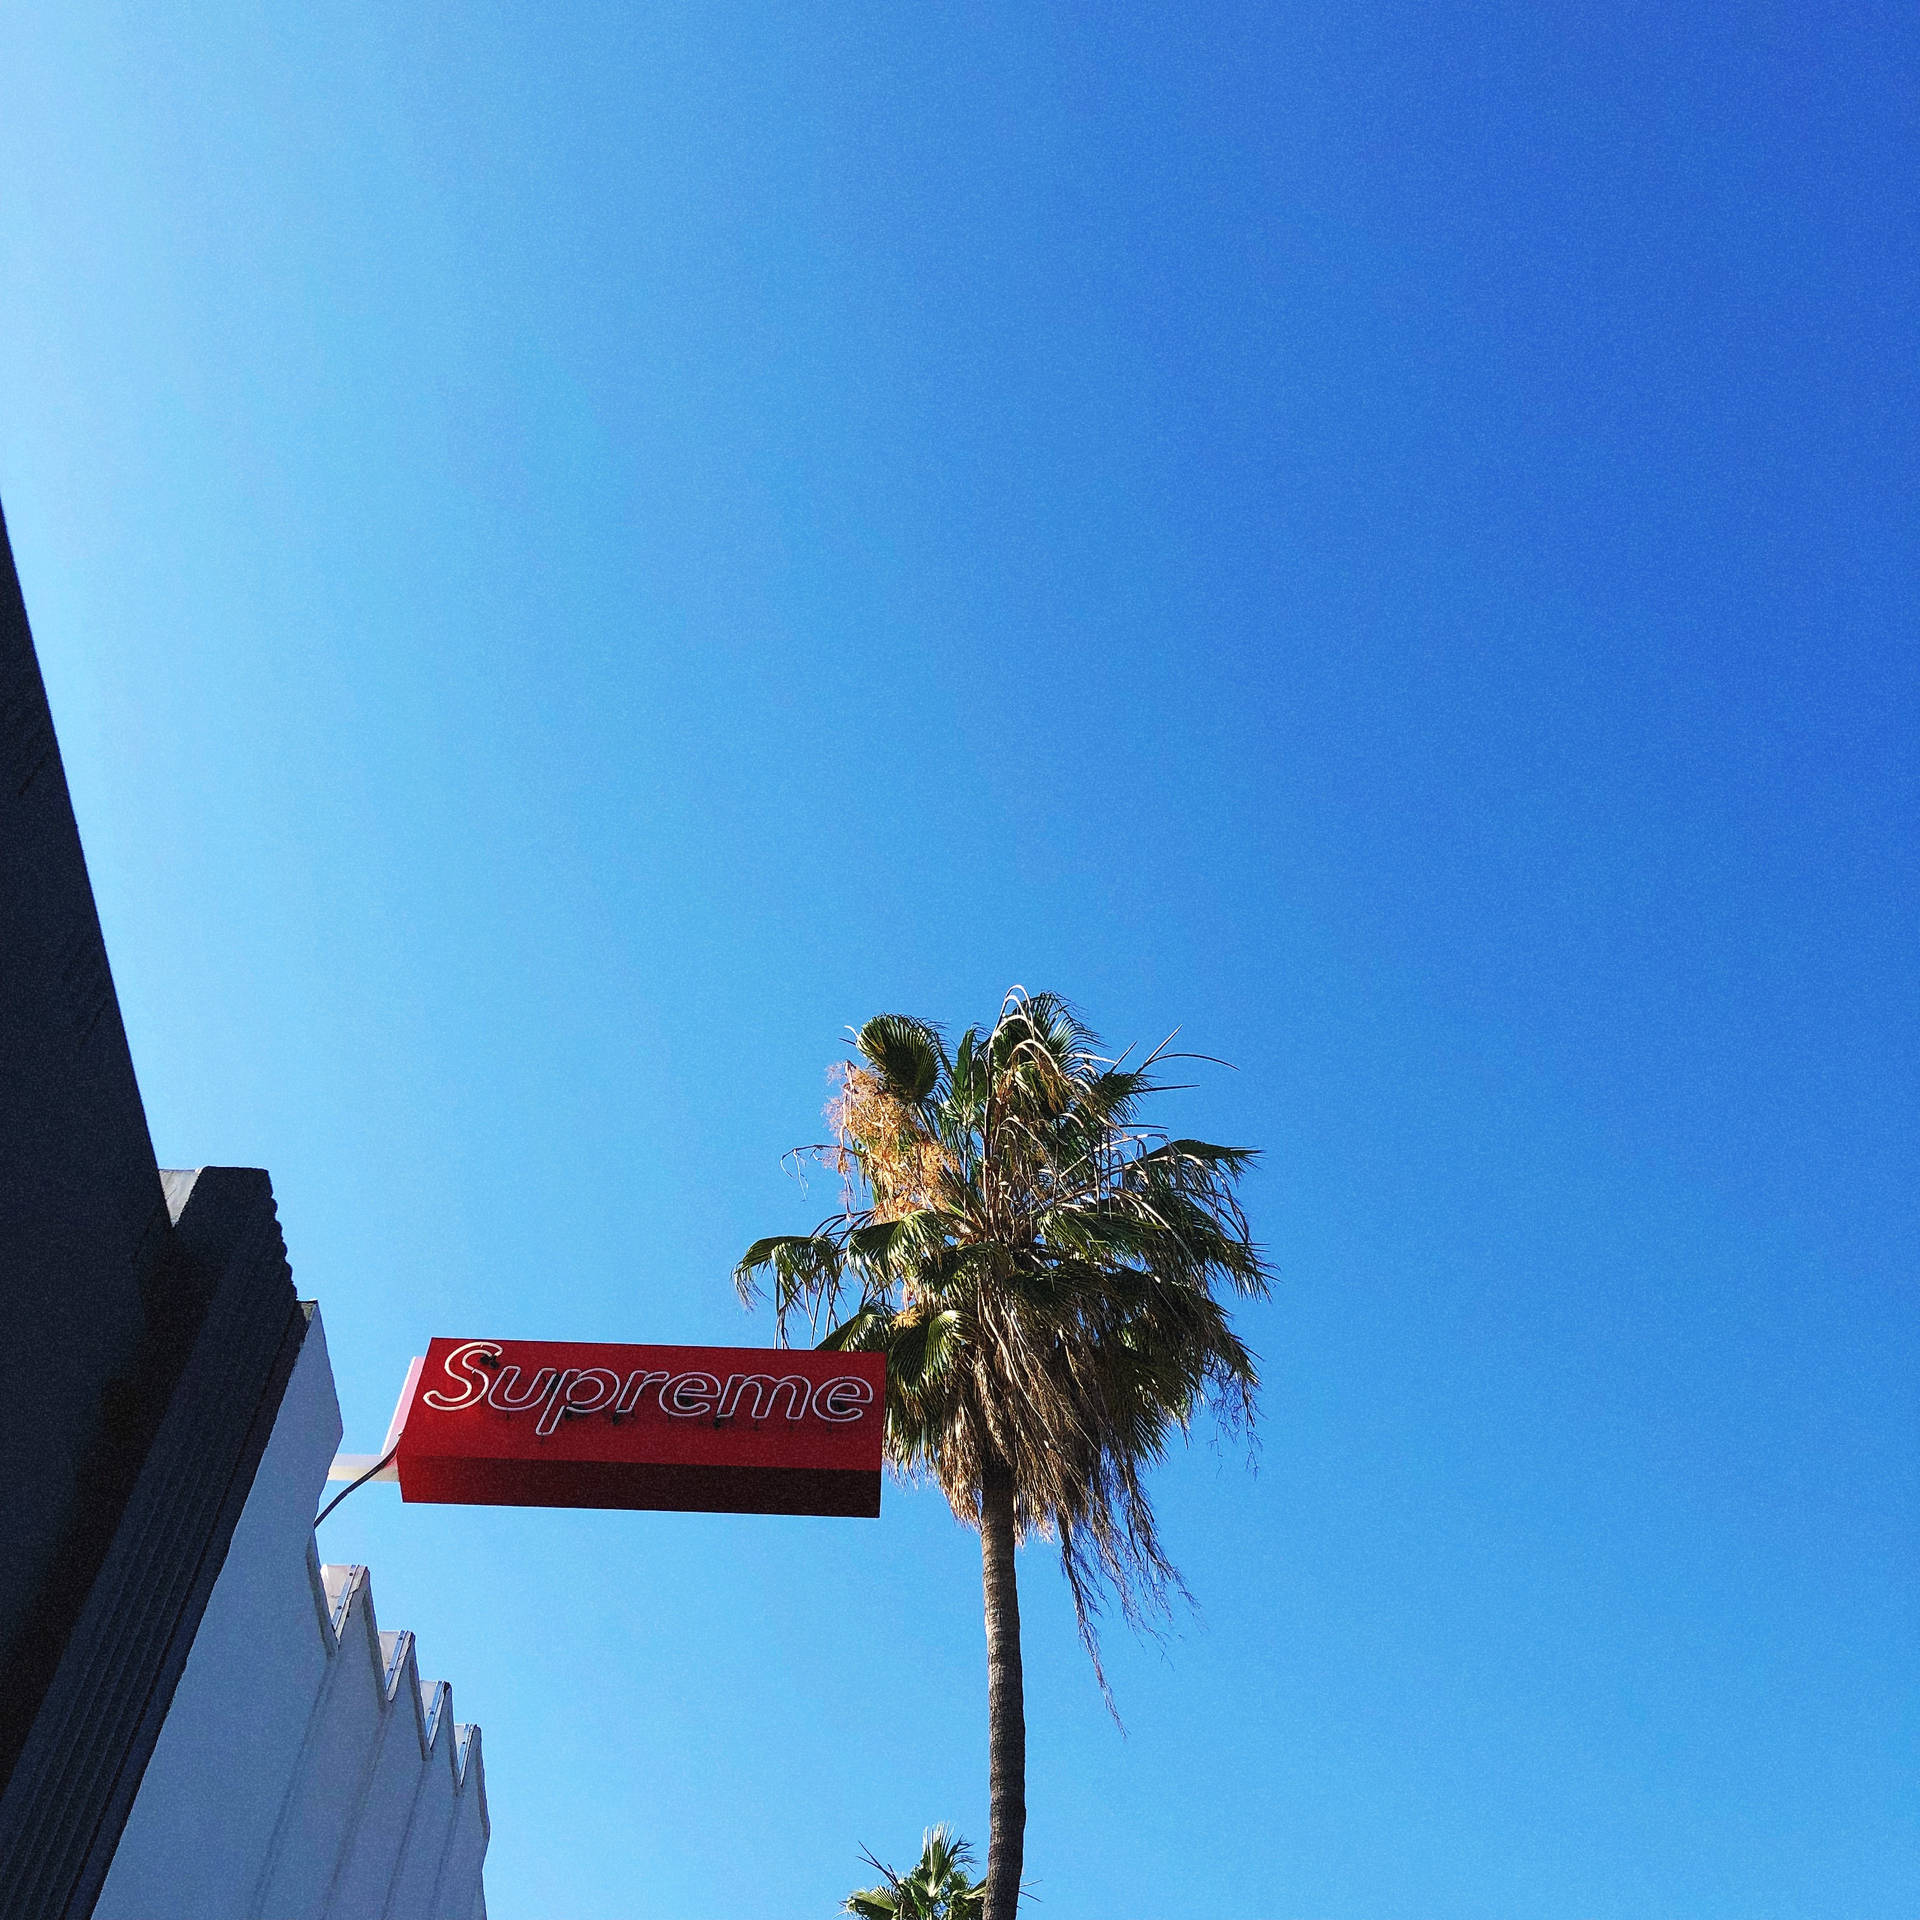 A Supreme wallpaper featuring a palm tree and a Supreme sign. - Supreme